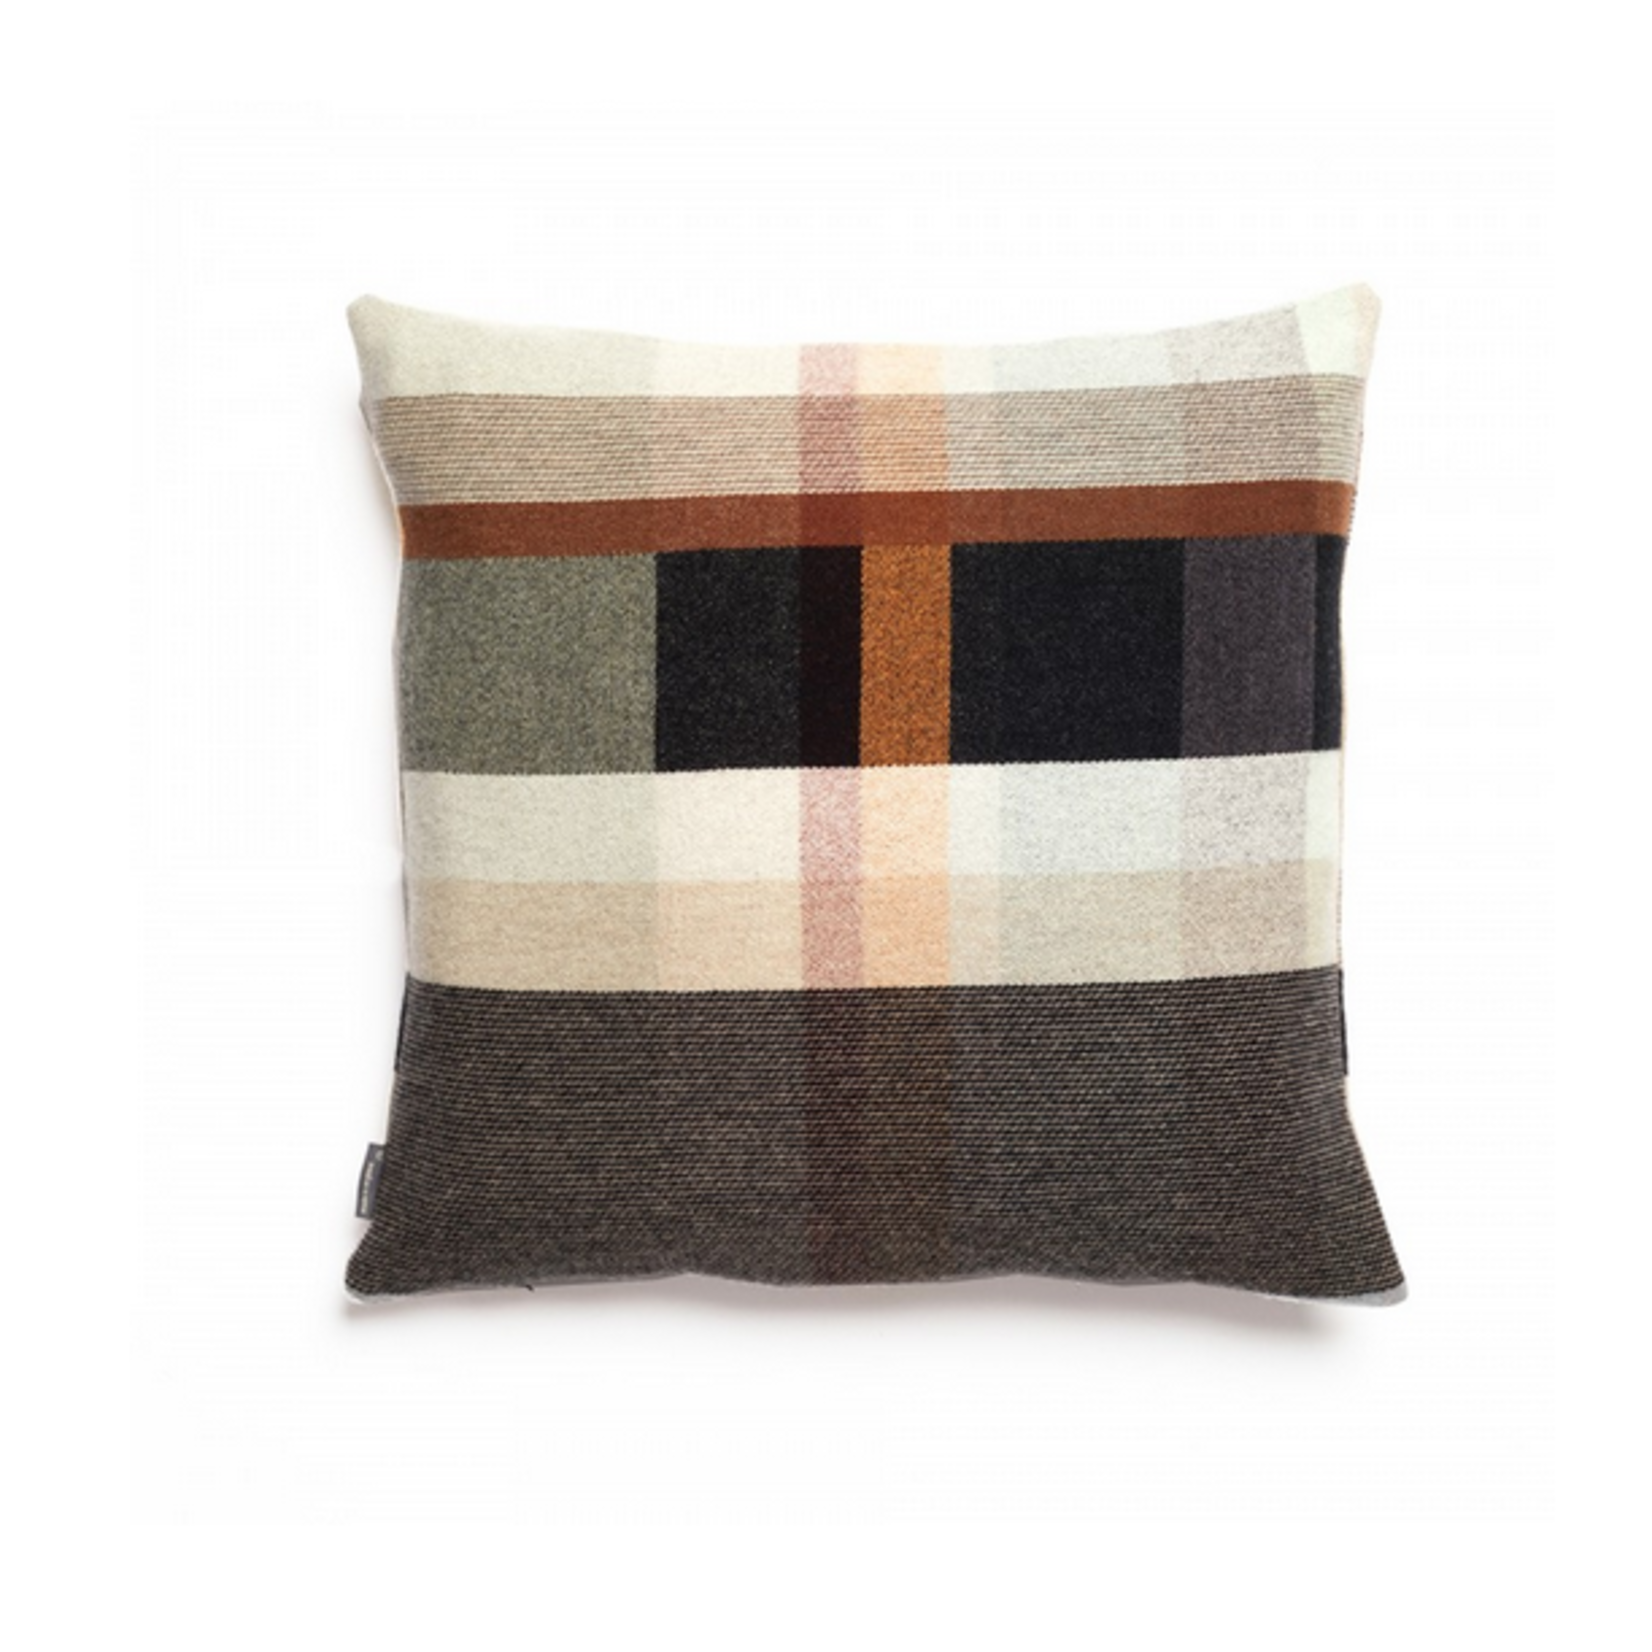 Wallace Sewell W&S Chipperfield Lambswool Cushion 20 x 20